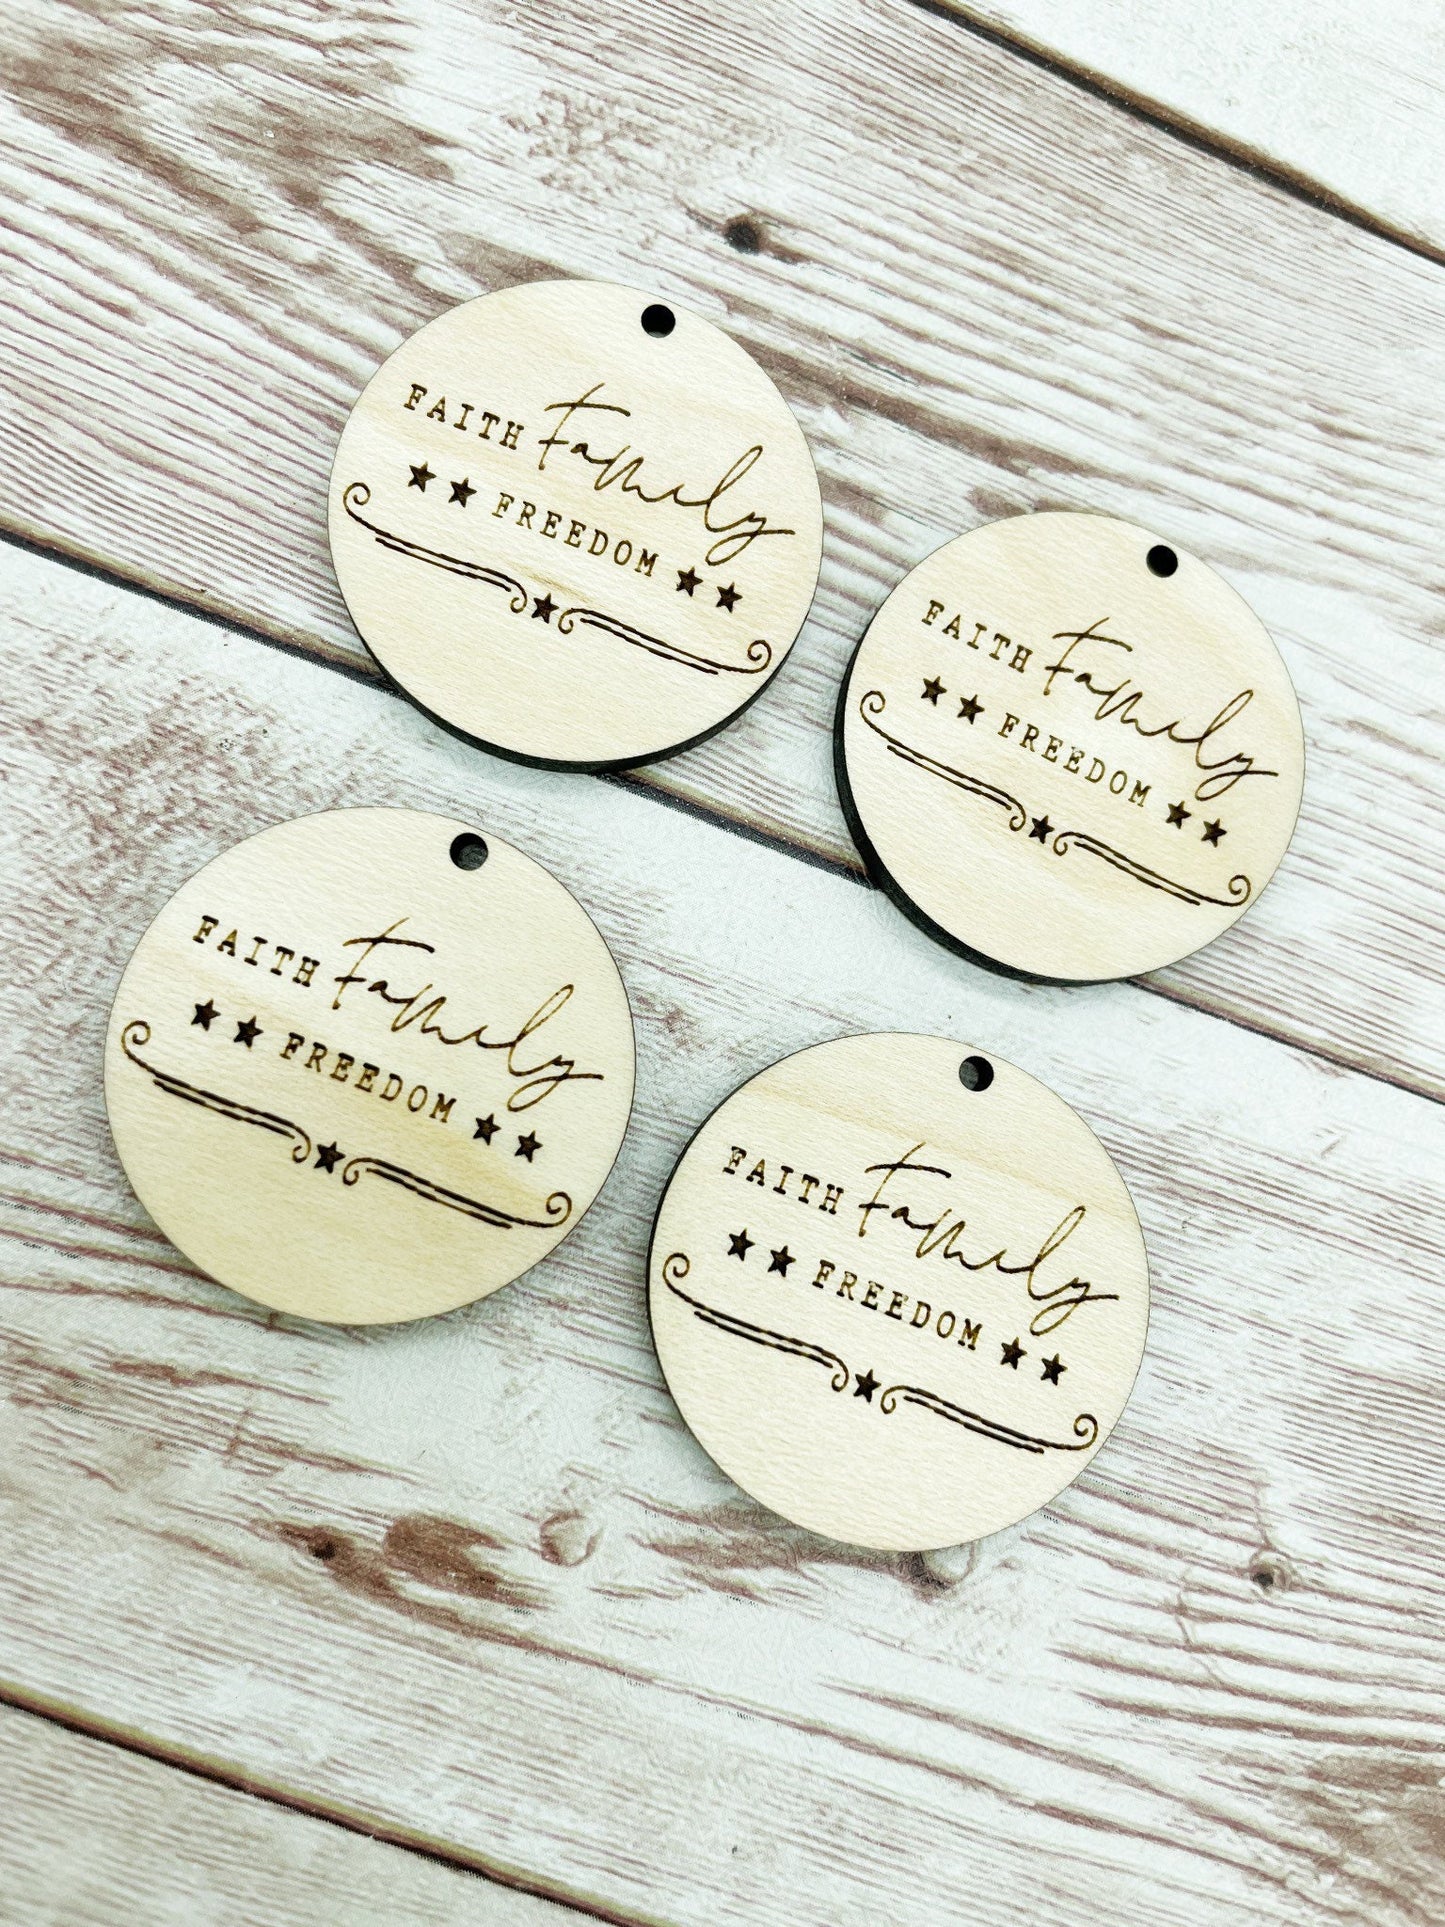 Wood Engraved Faith Family Freedom Earring Blanks, Finished Maple Blank, DIY Jewelry Making